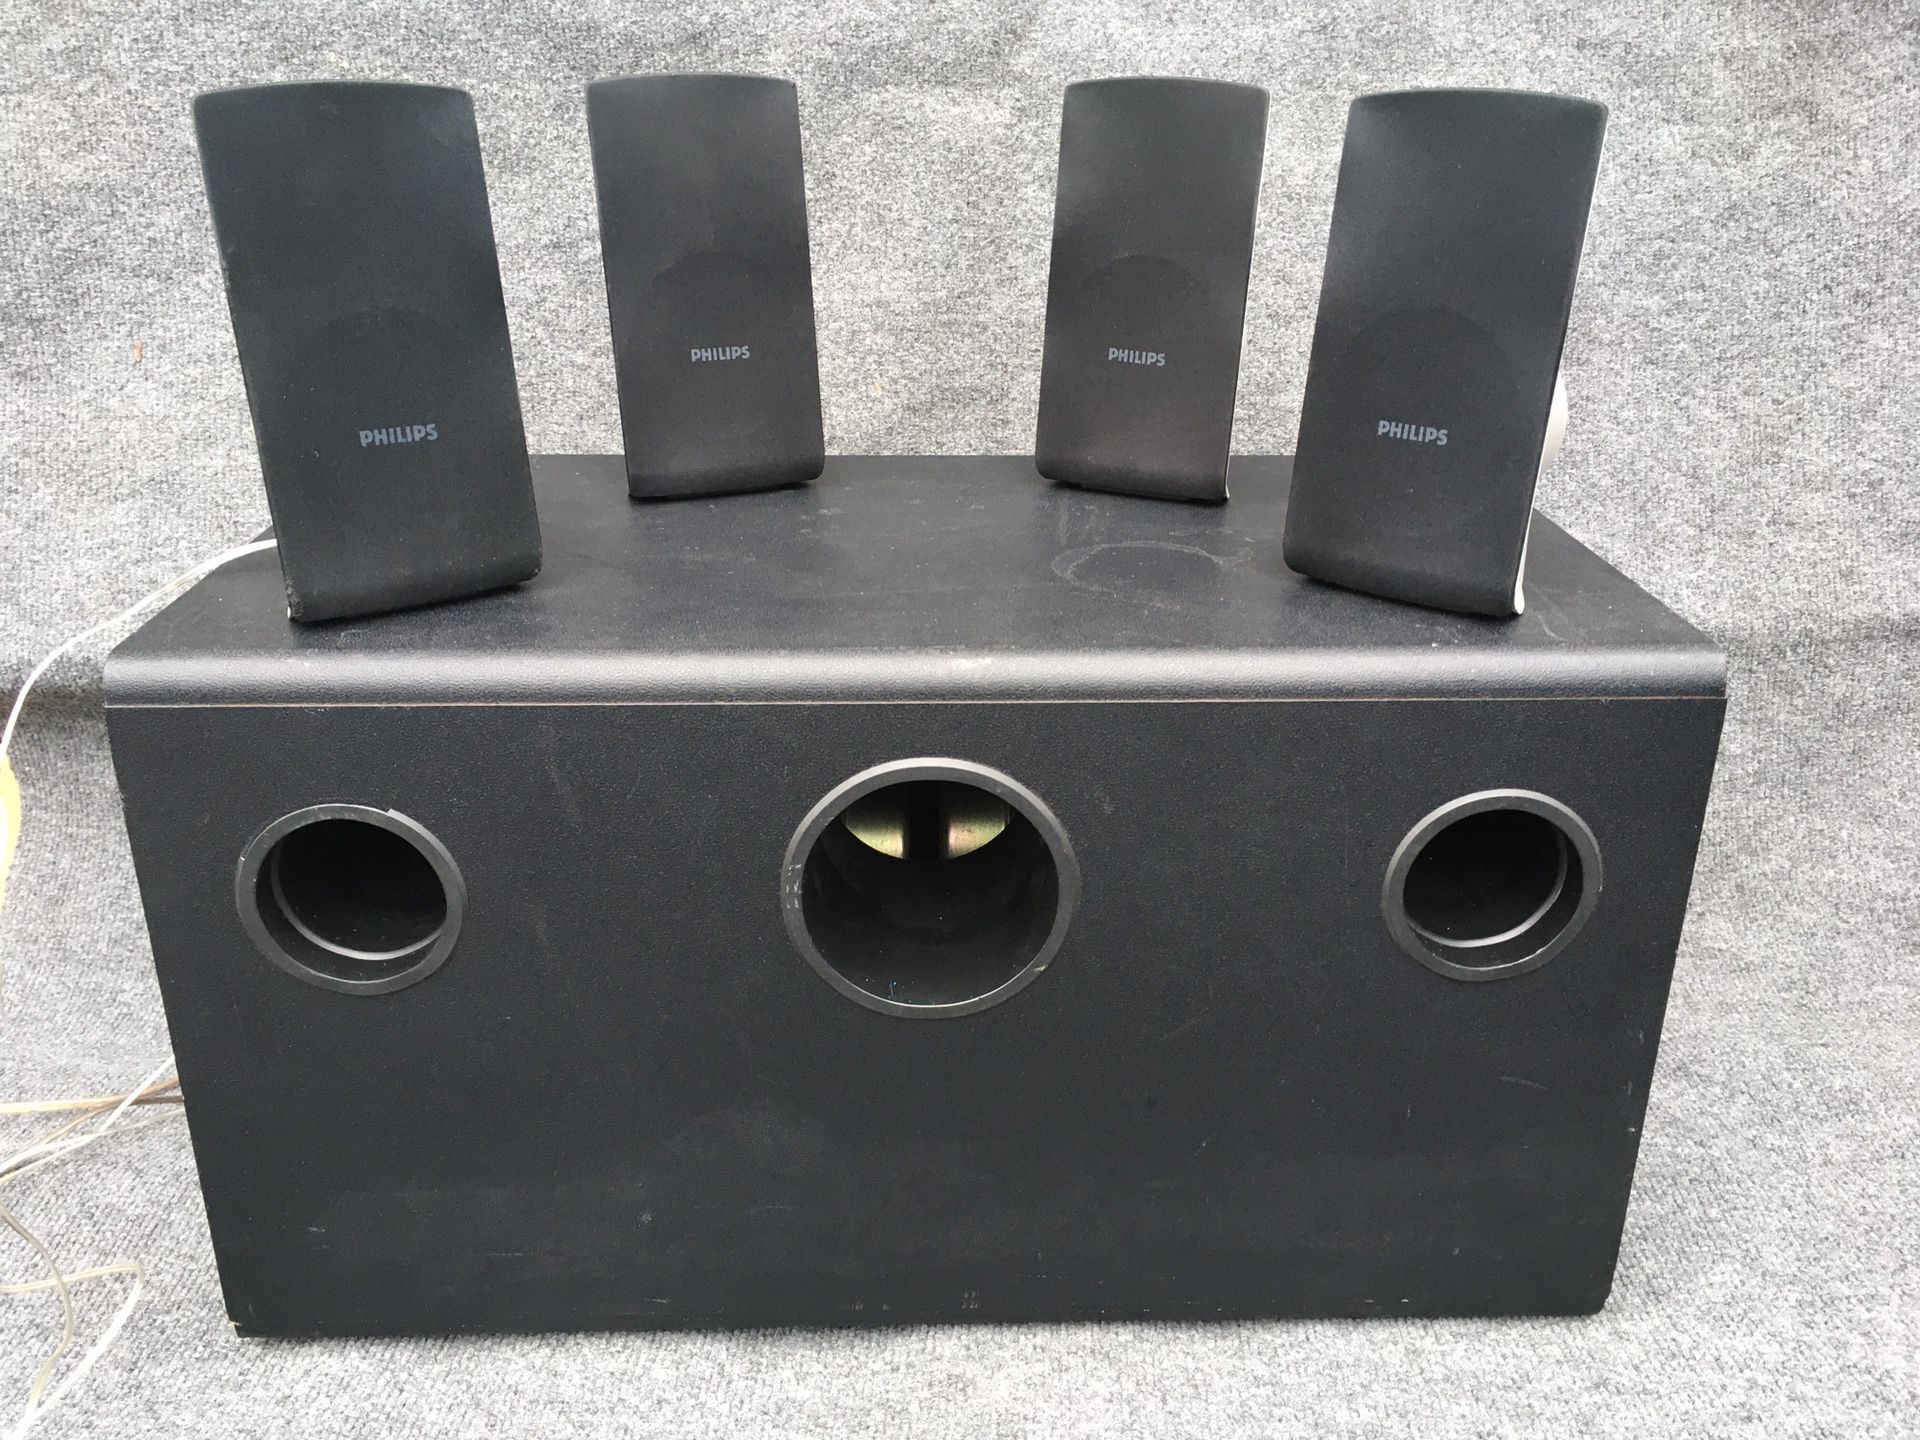 Perennial Kontrakt bar JUST COME AND LISTEN TO IT FIRST JBL Control (Sb-5) 350 W Subwoofer  (Professional grade) and 4 Philips Satellite Speakers (CS 3450 E) with LONG  WIRES for Sale in La Mesa, CA - OfferUp